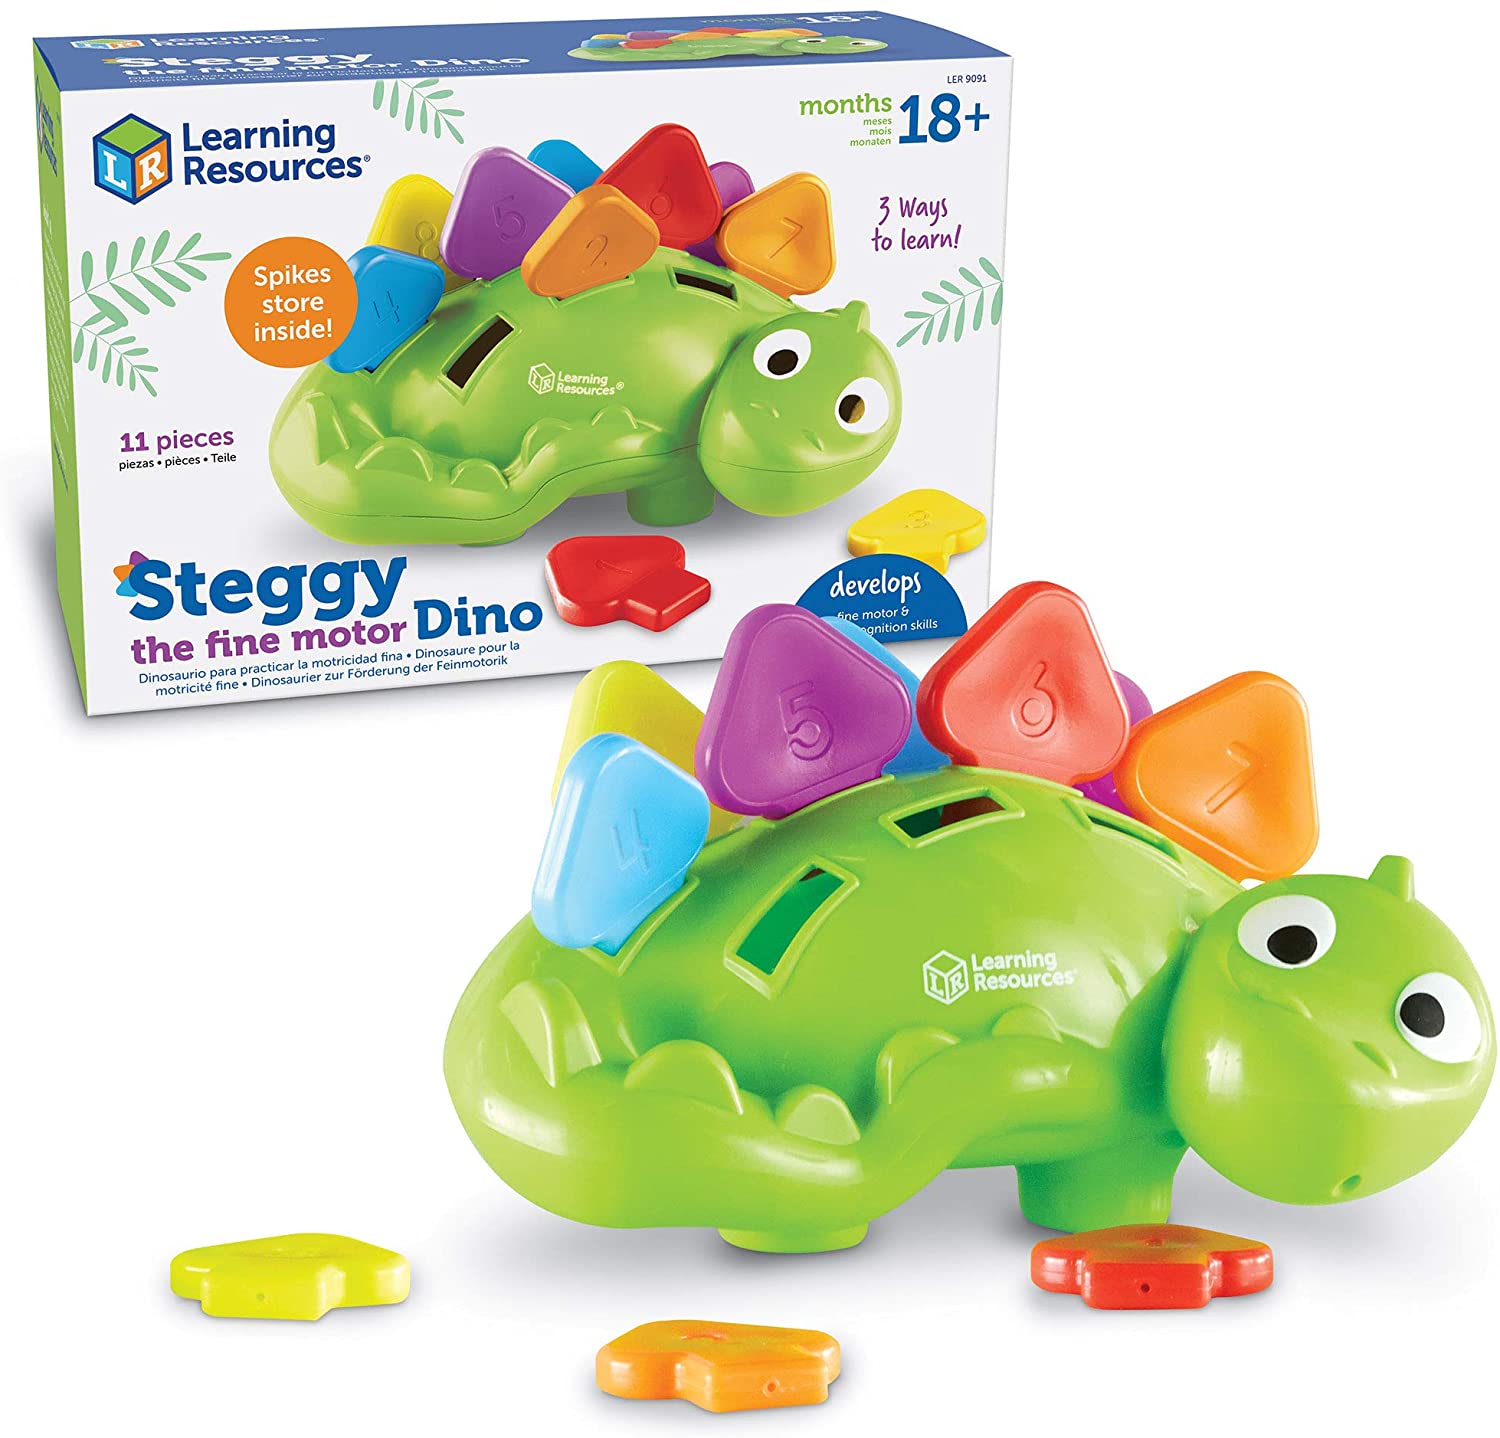 This prehistoric pal is ready for fine motor fun! Kids build the hand strength they need to succeed in school and beyond every time they play with Steggy the Fine Motor Dino. The friendliest fine motor toy for toddlers, this easygoing dinosaur comes with 10 pinchable, pullable scales, whose indented surfaces make it easy for kids to build their pincer grasp, hand strength, and other essentials of fine motor skills development.